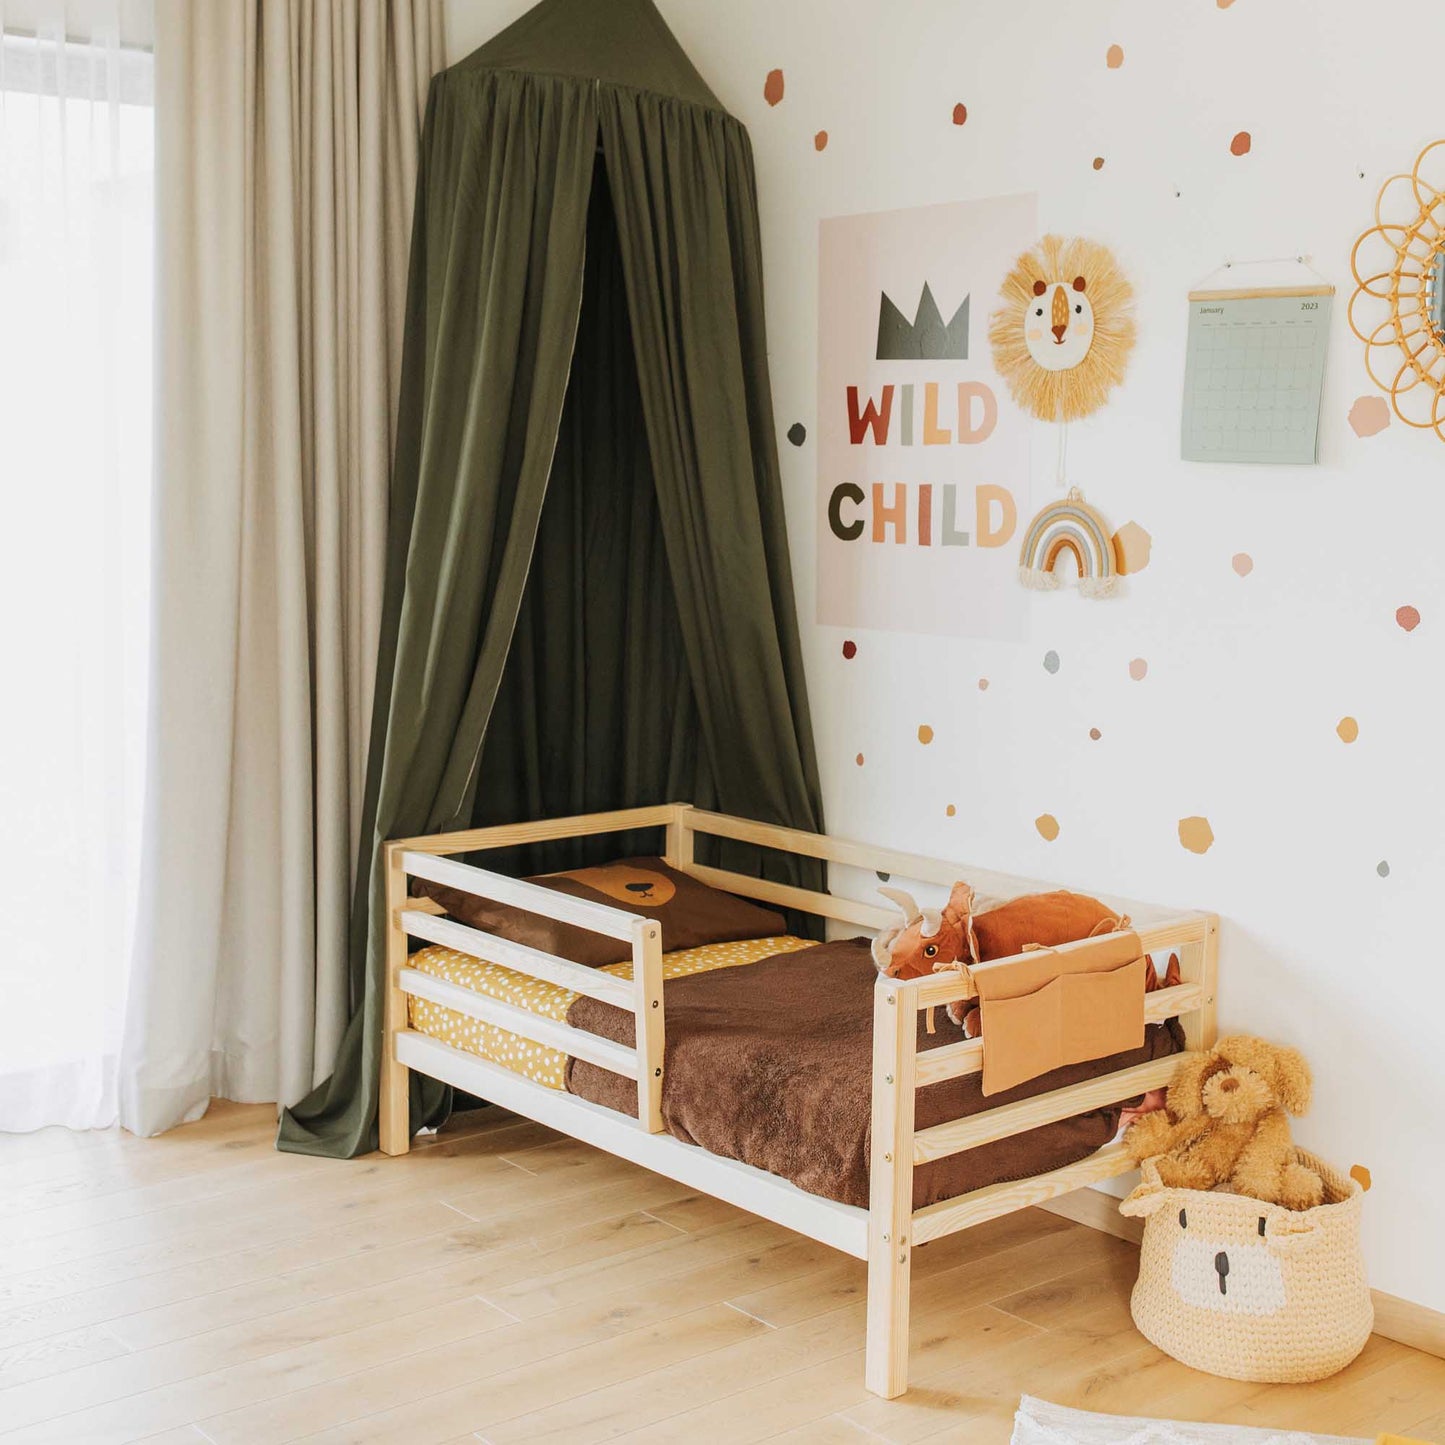 A child's 2-in-1 transformable kids' bed with a canopy and teddy bears made by Sweet Home From Wood.